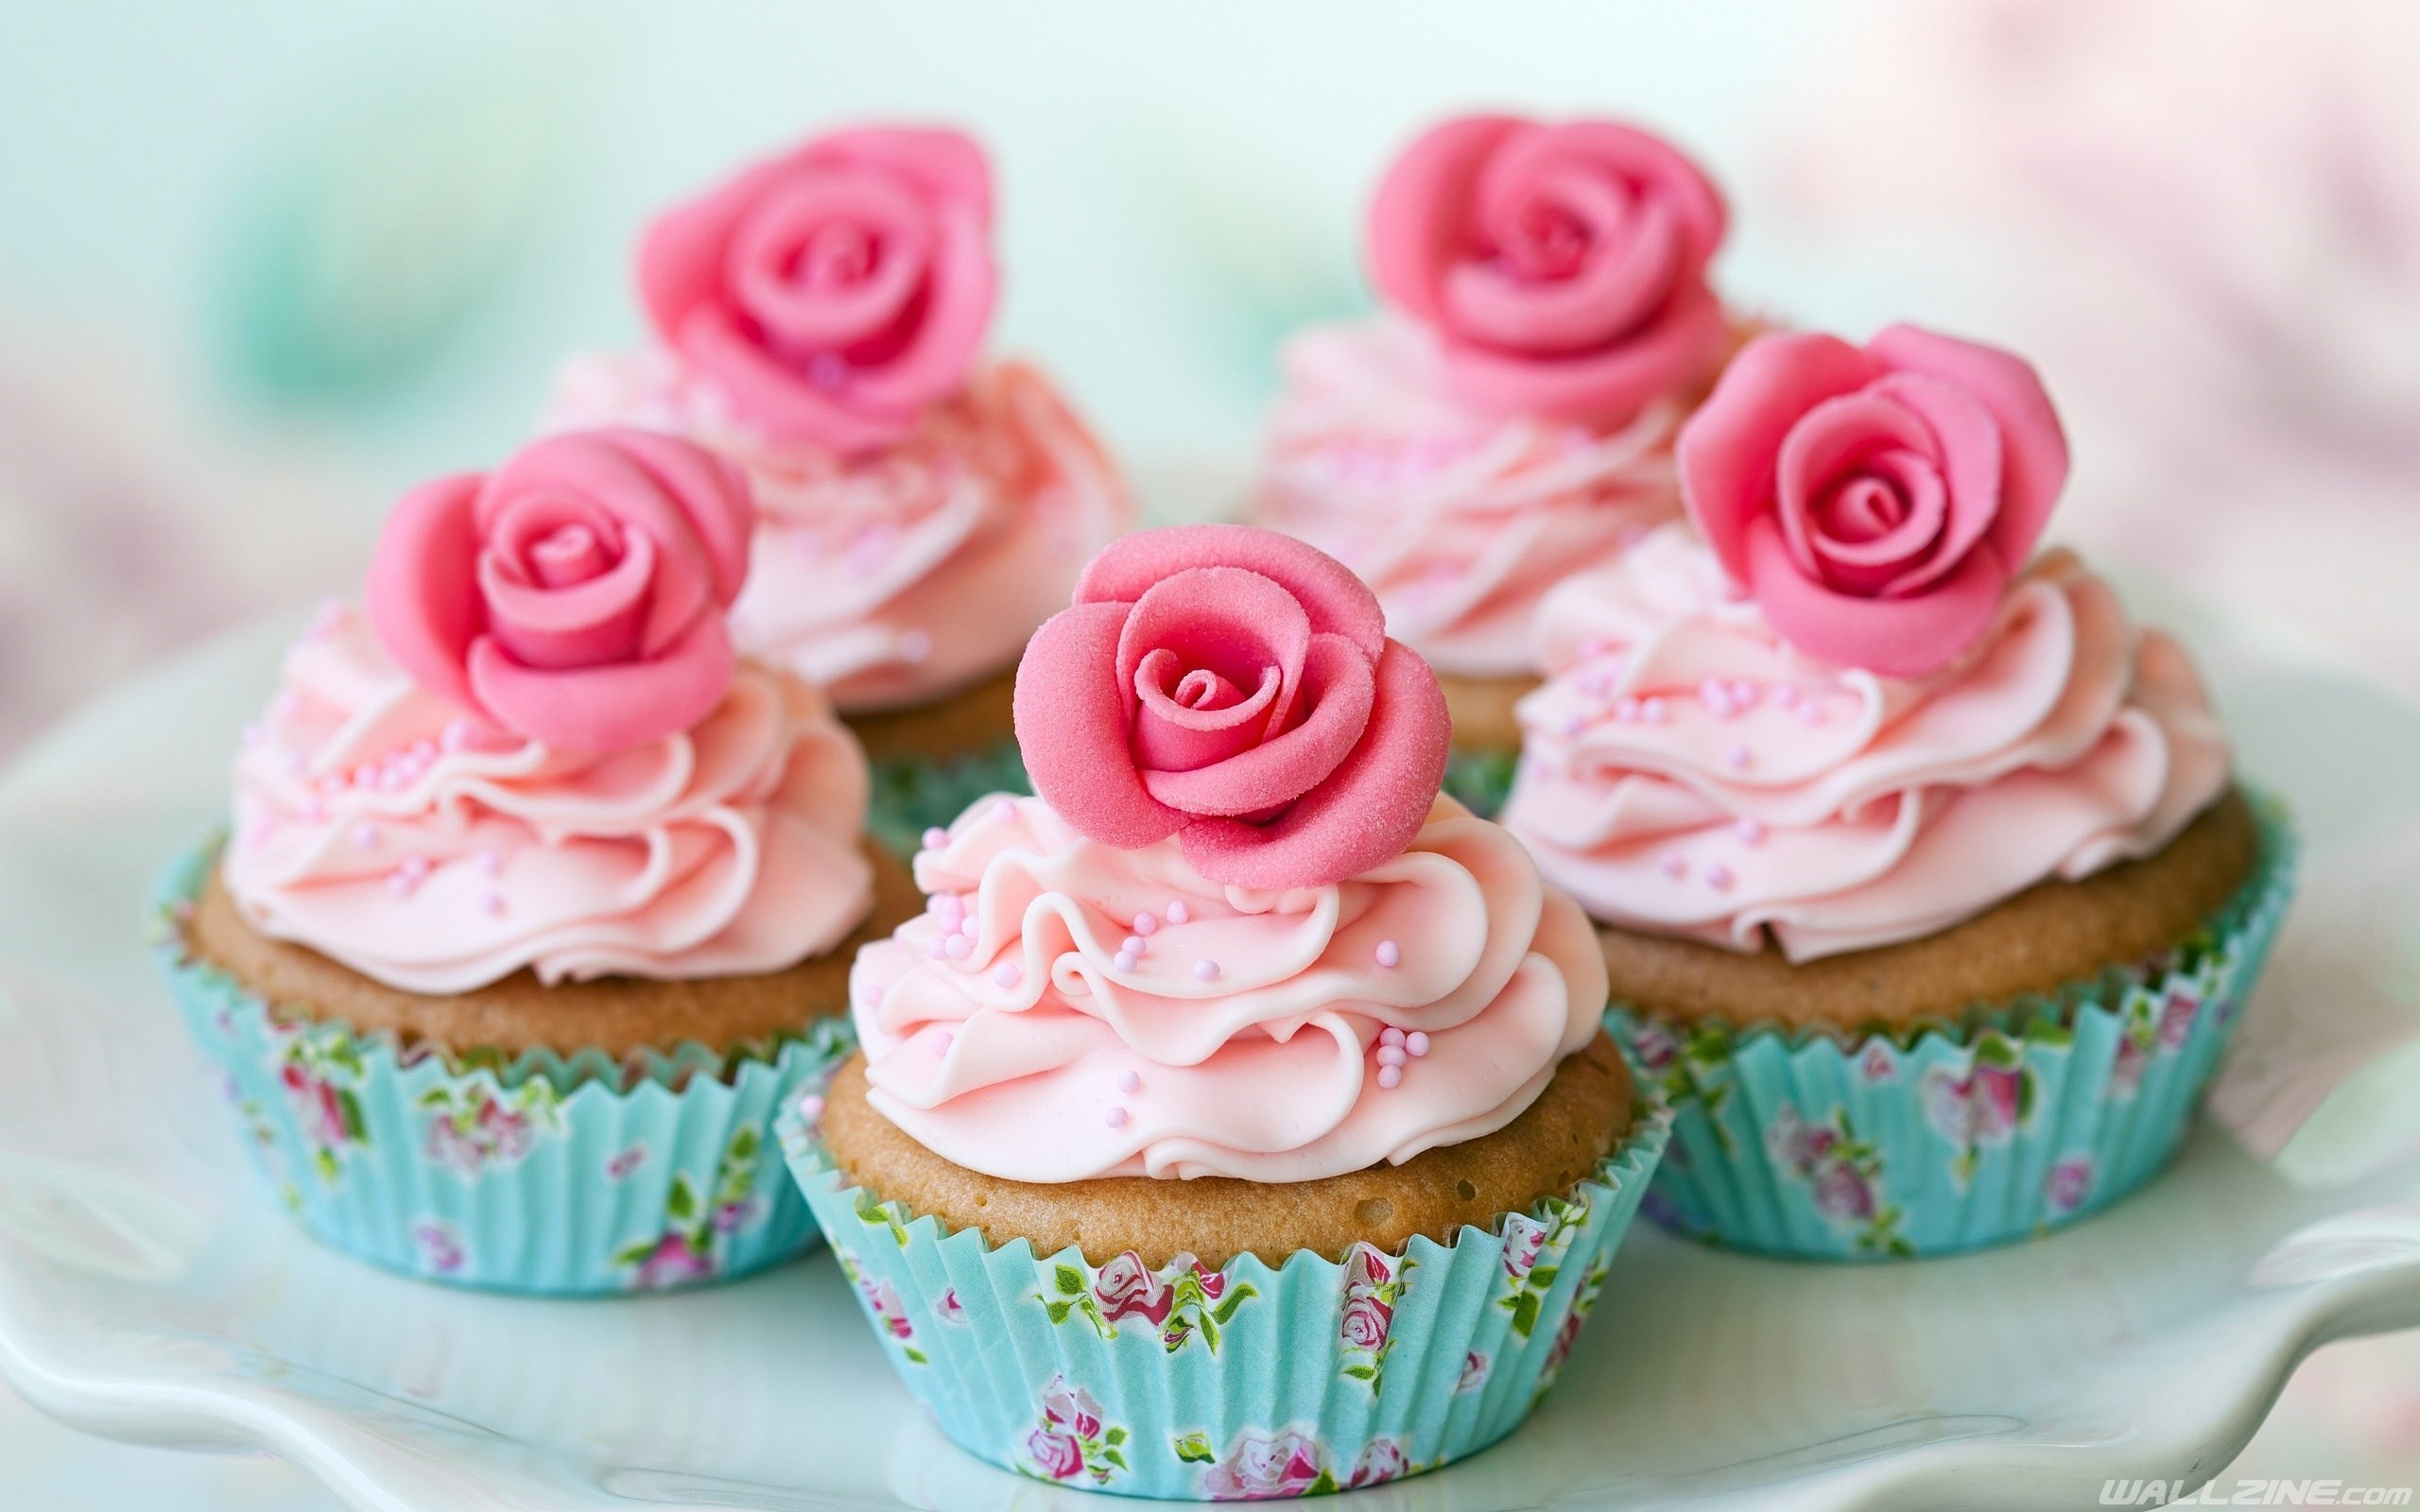 2560x1600 Explore Pink Cupcakes, Pretty Cupcakes, and more! Vintage Cupcakes Wallpaper